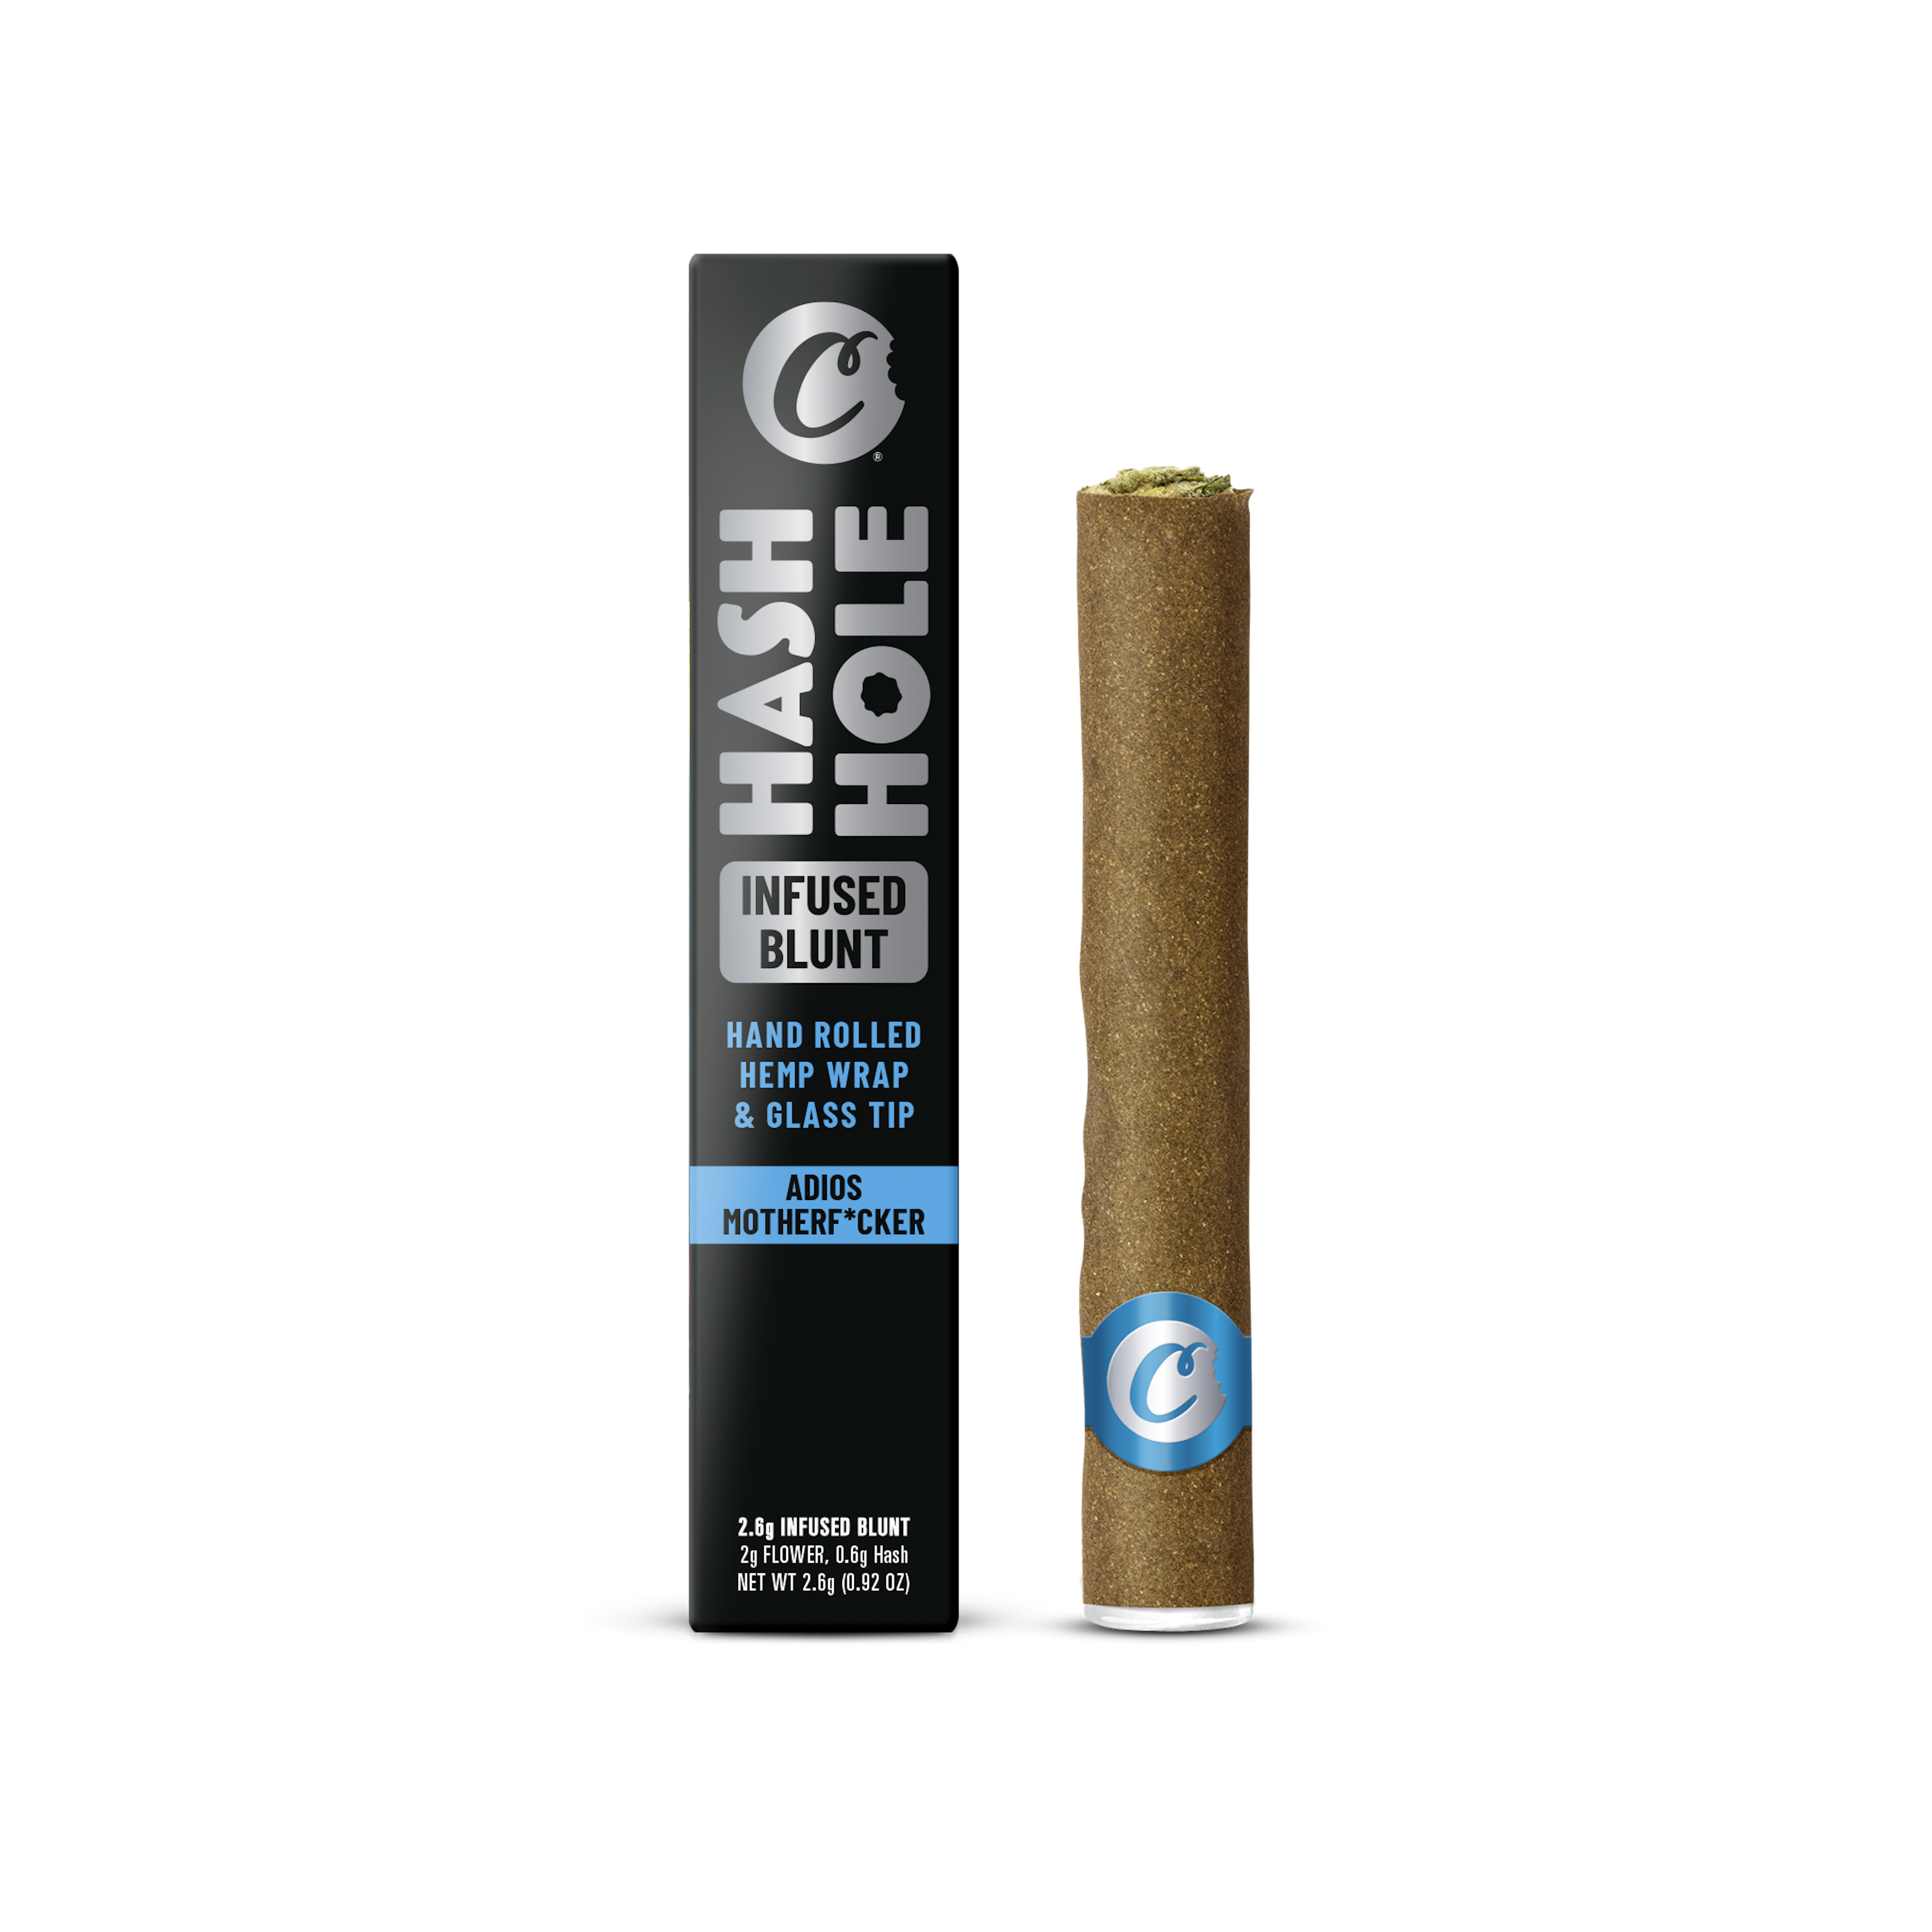 Cookies - Adios Mother Fucker - THC - Infused - Blunt - Preroll - Tube - Pouch - 2.6g - CA